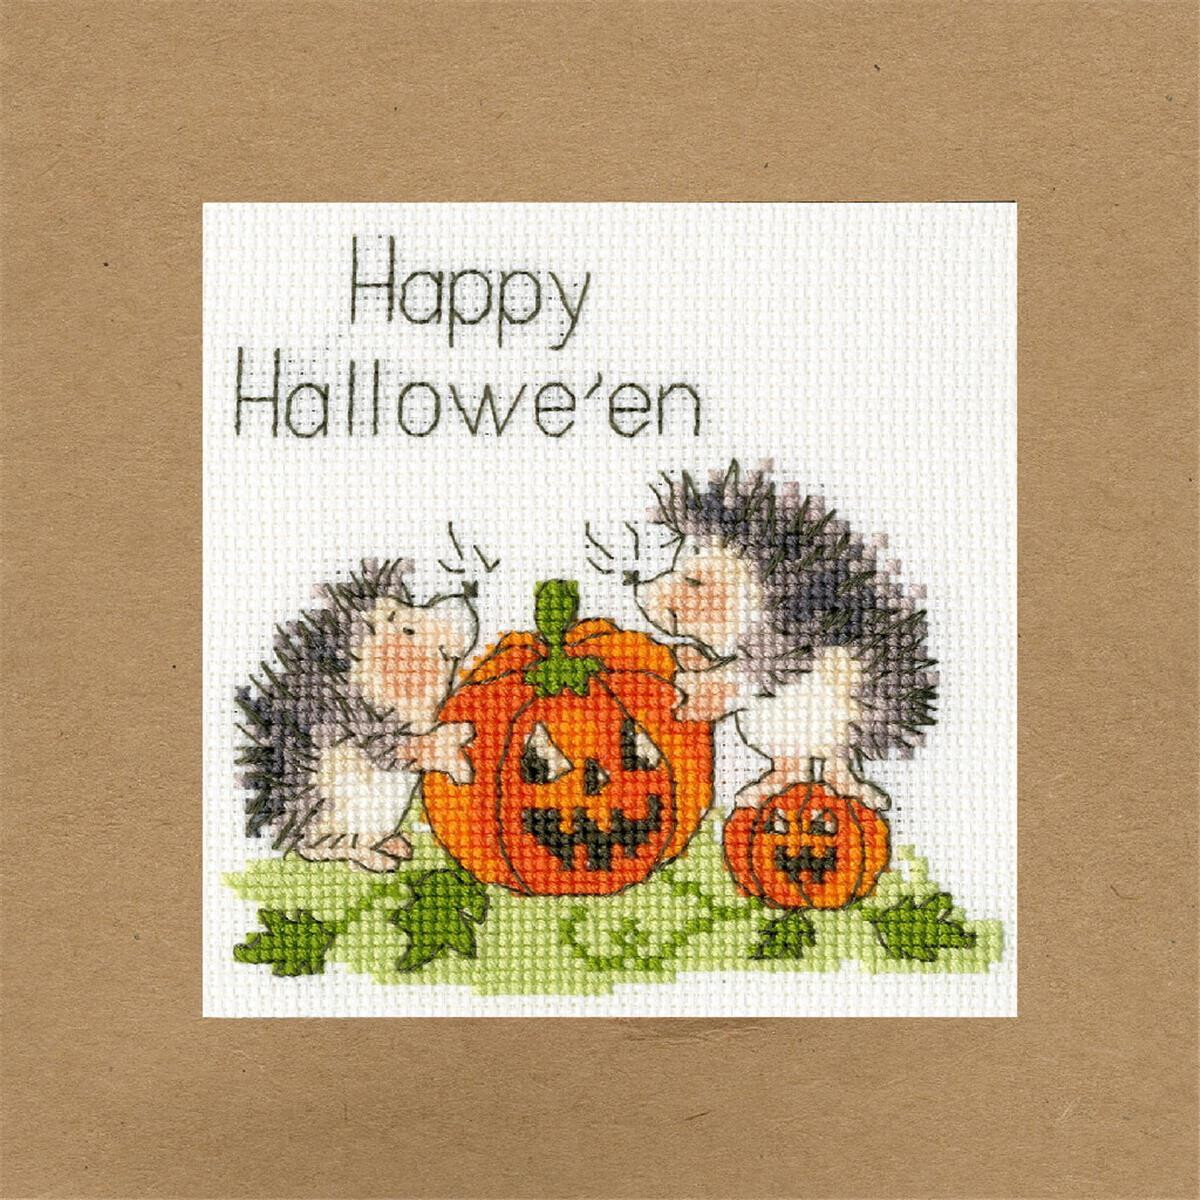 A Halloween card features two hedgehogs holding a large,...